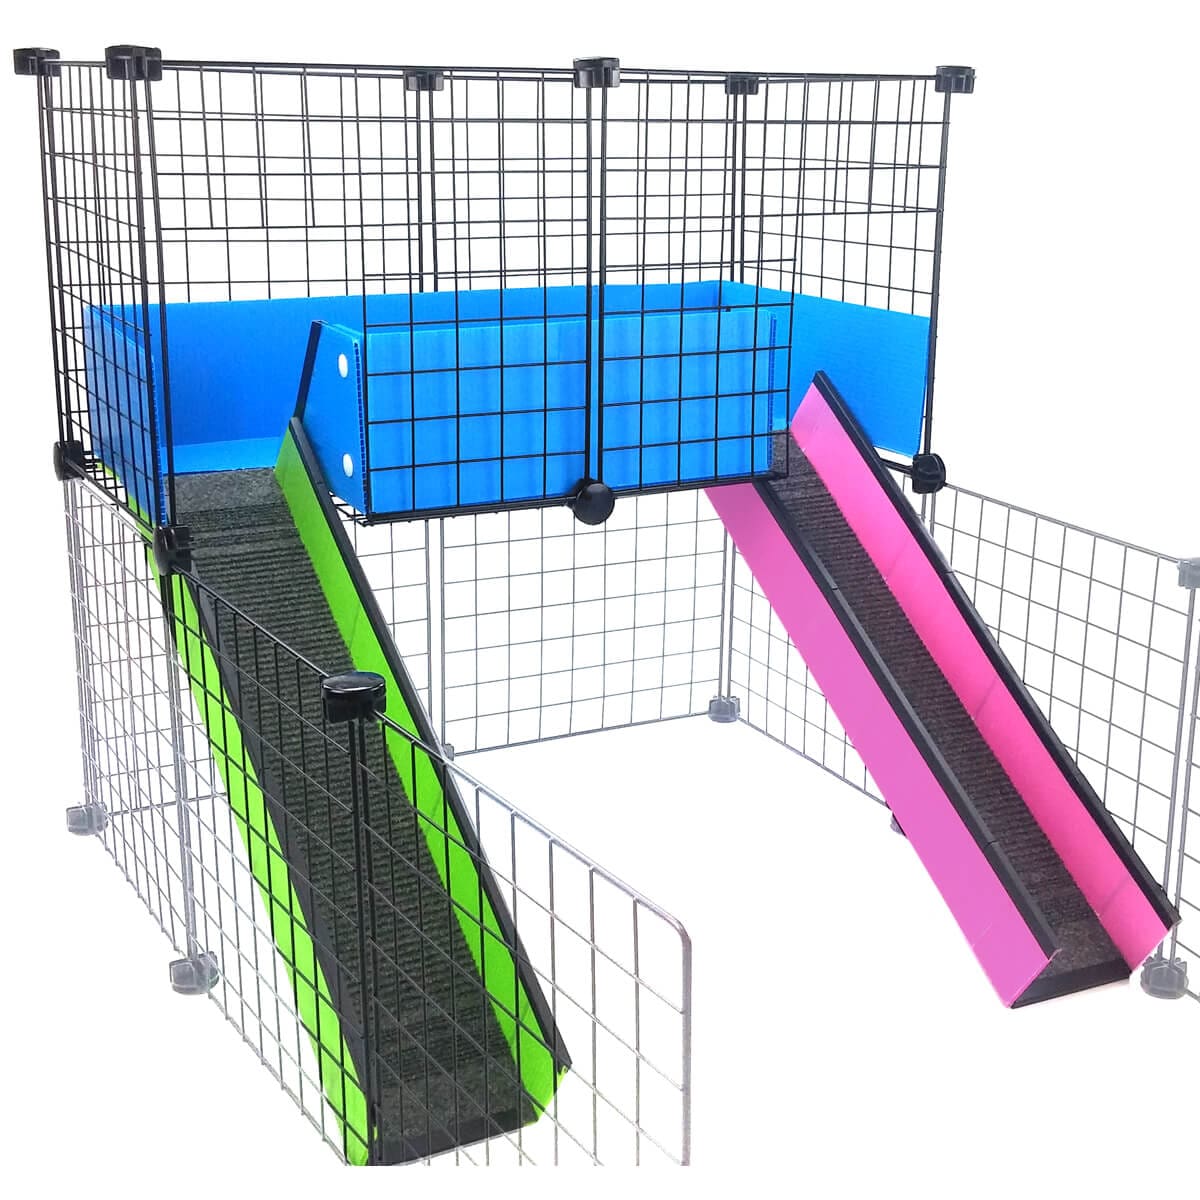 Light blue narrow loop loft with colorful ramps designed for a C&C guinea pig cage